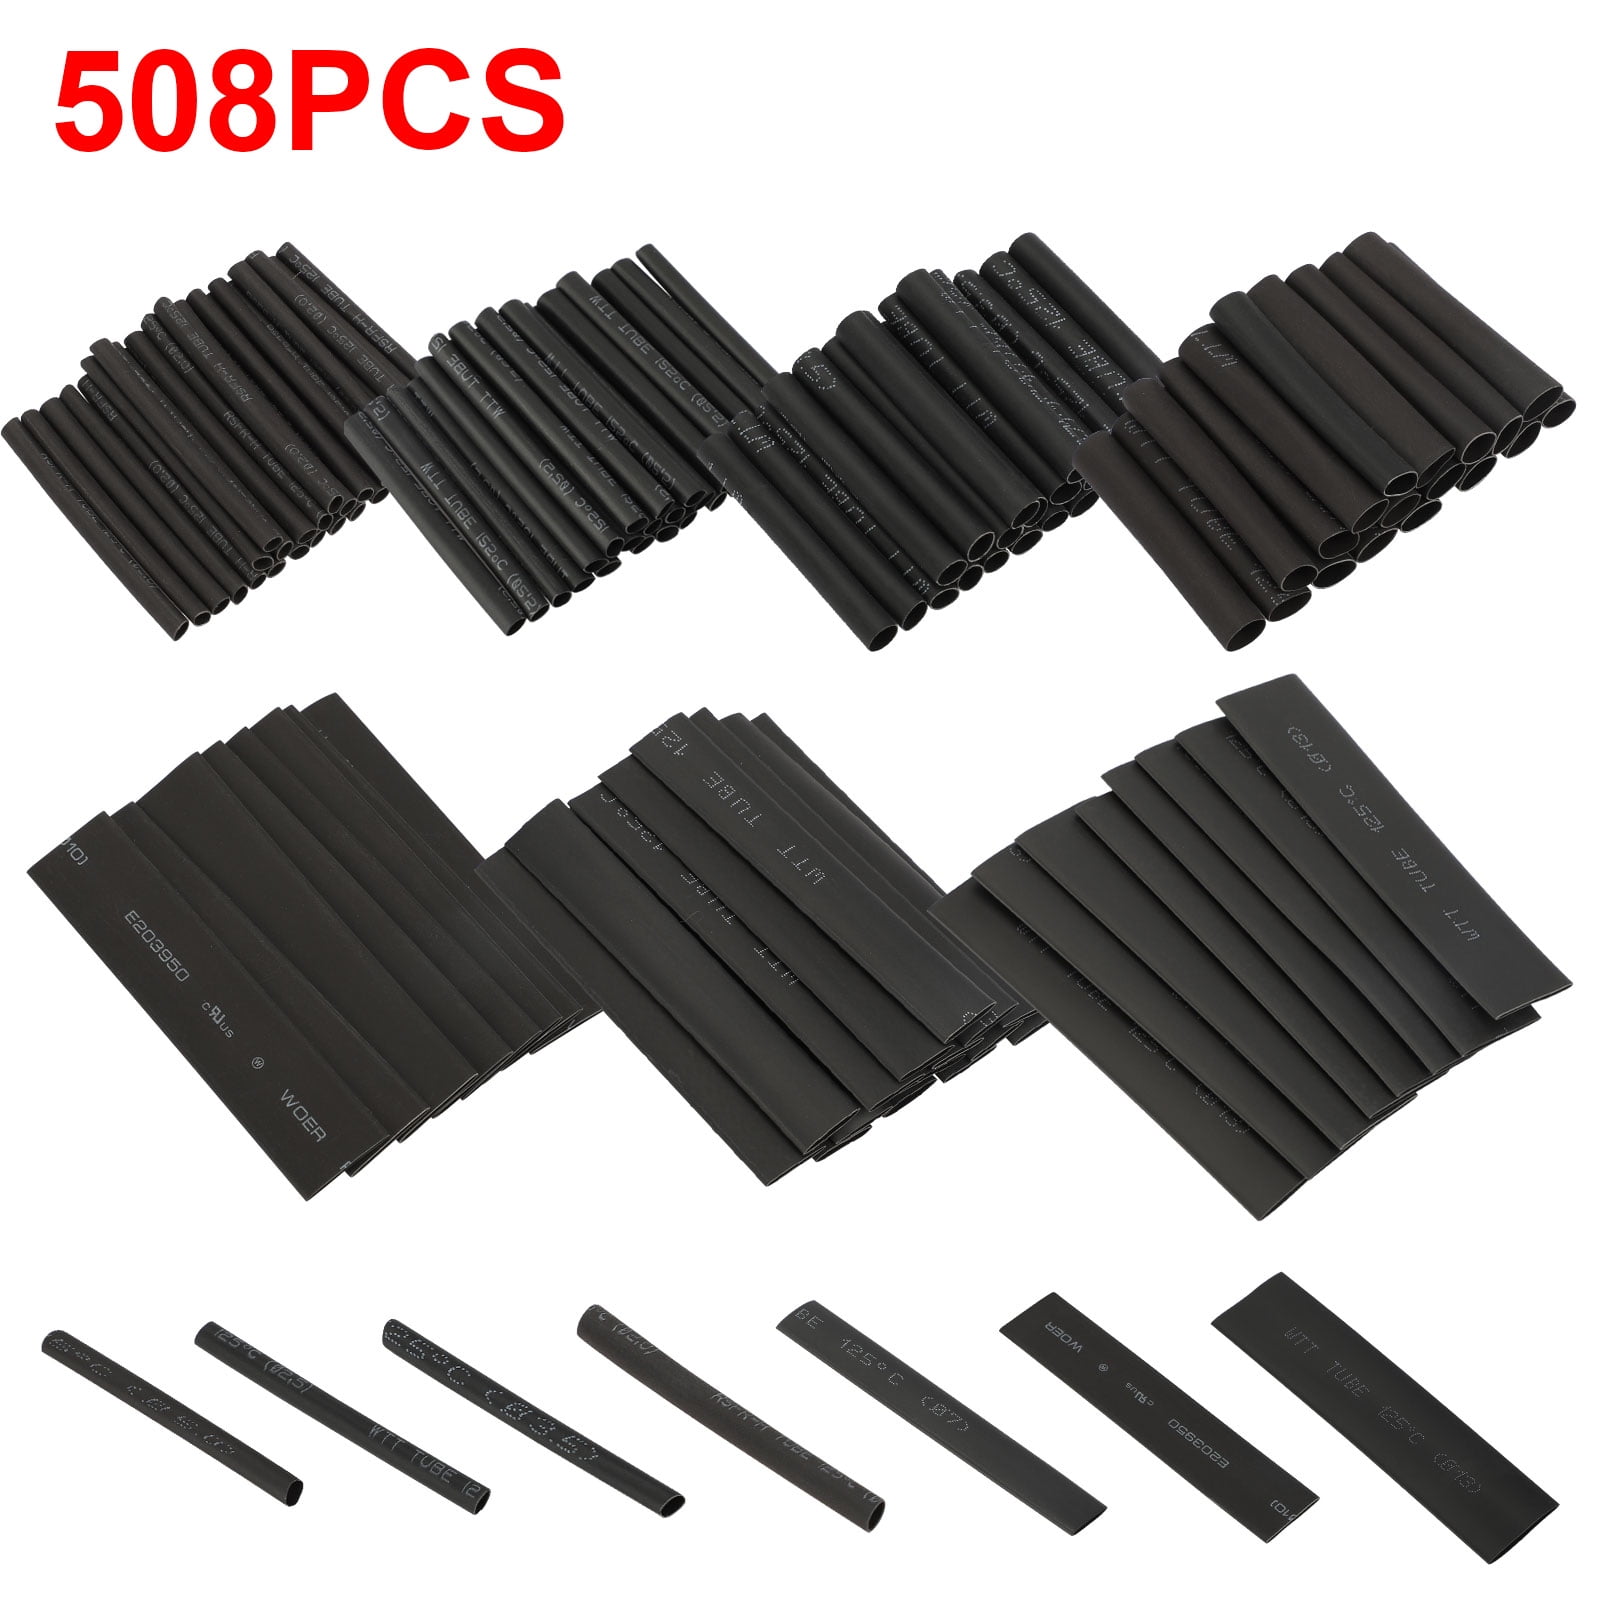 127Pcs Black Heat Shrink Tubing Tube Cable Sleeves Wrap Wire Set 7 Size for RC